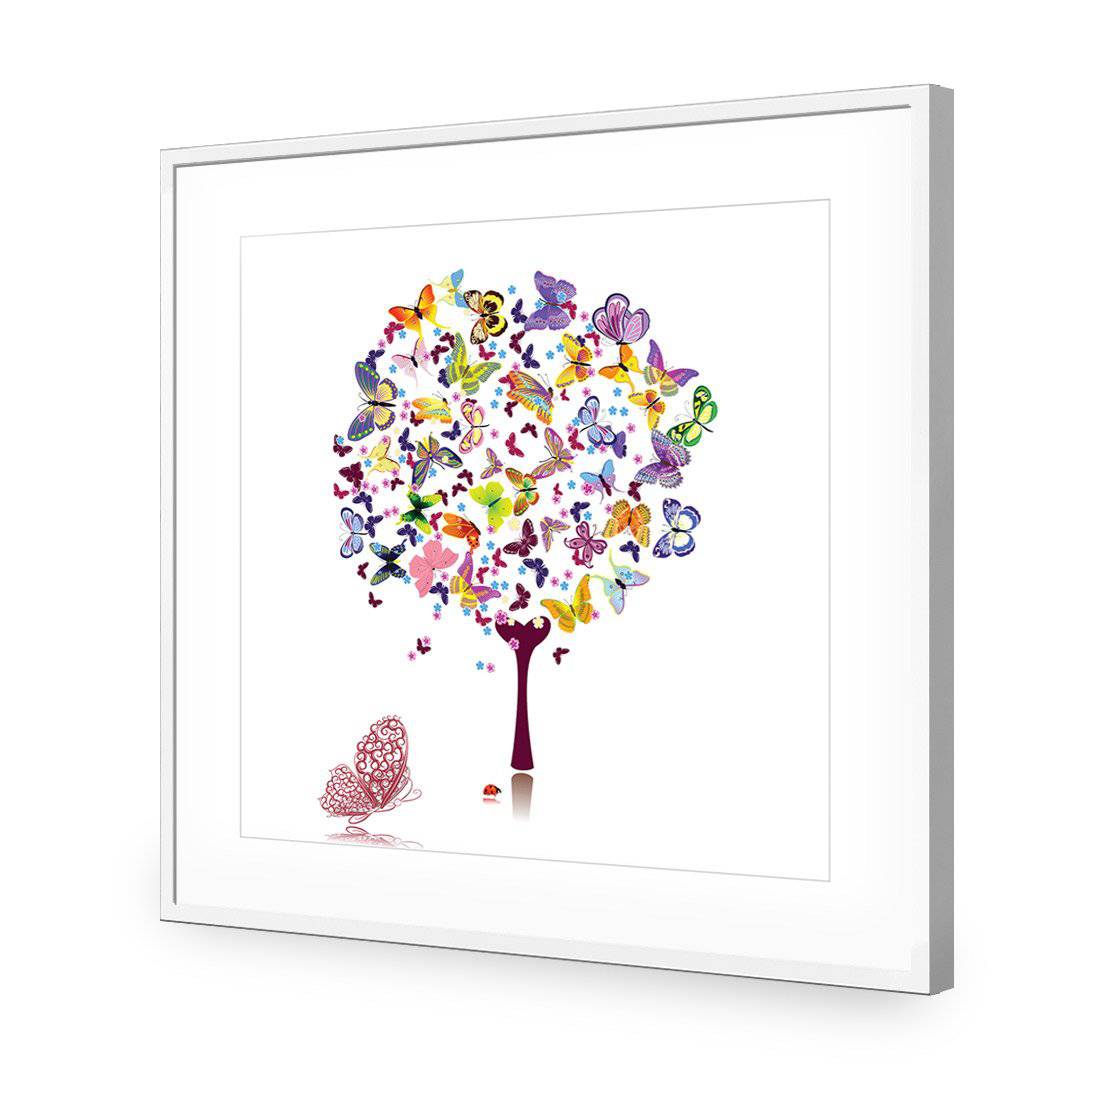 Day Dream Tree, Square-Acrylic-Wall Art Design-With Border-Acrylic - White Frame-37x37cm-Wall Art Designs